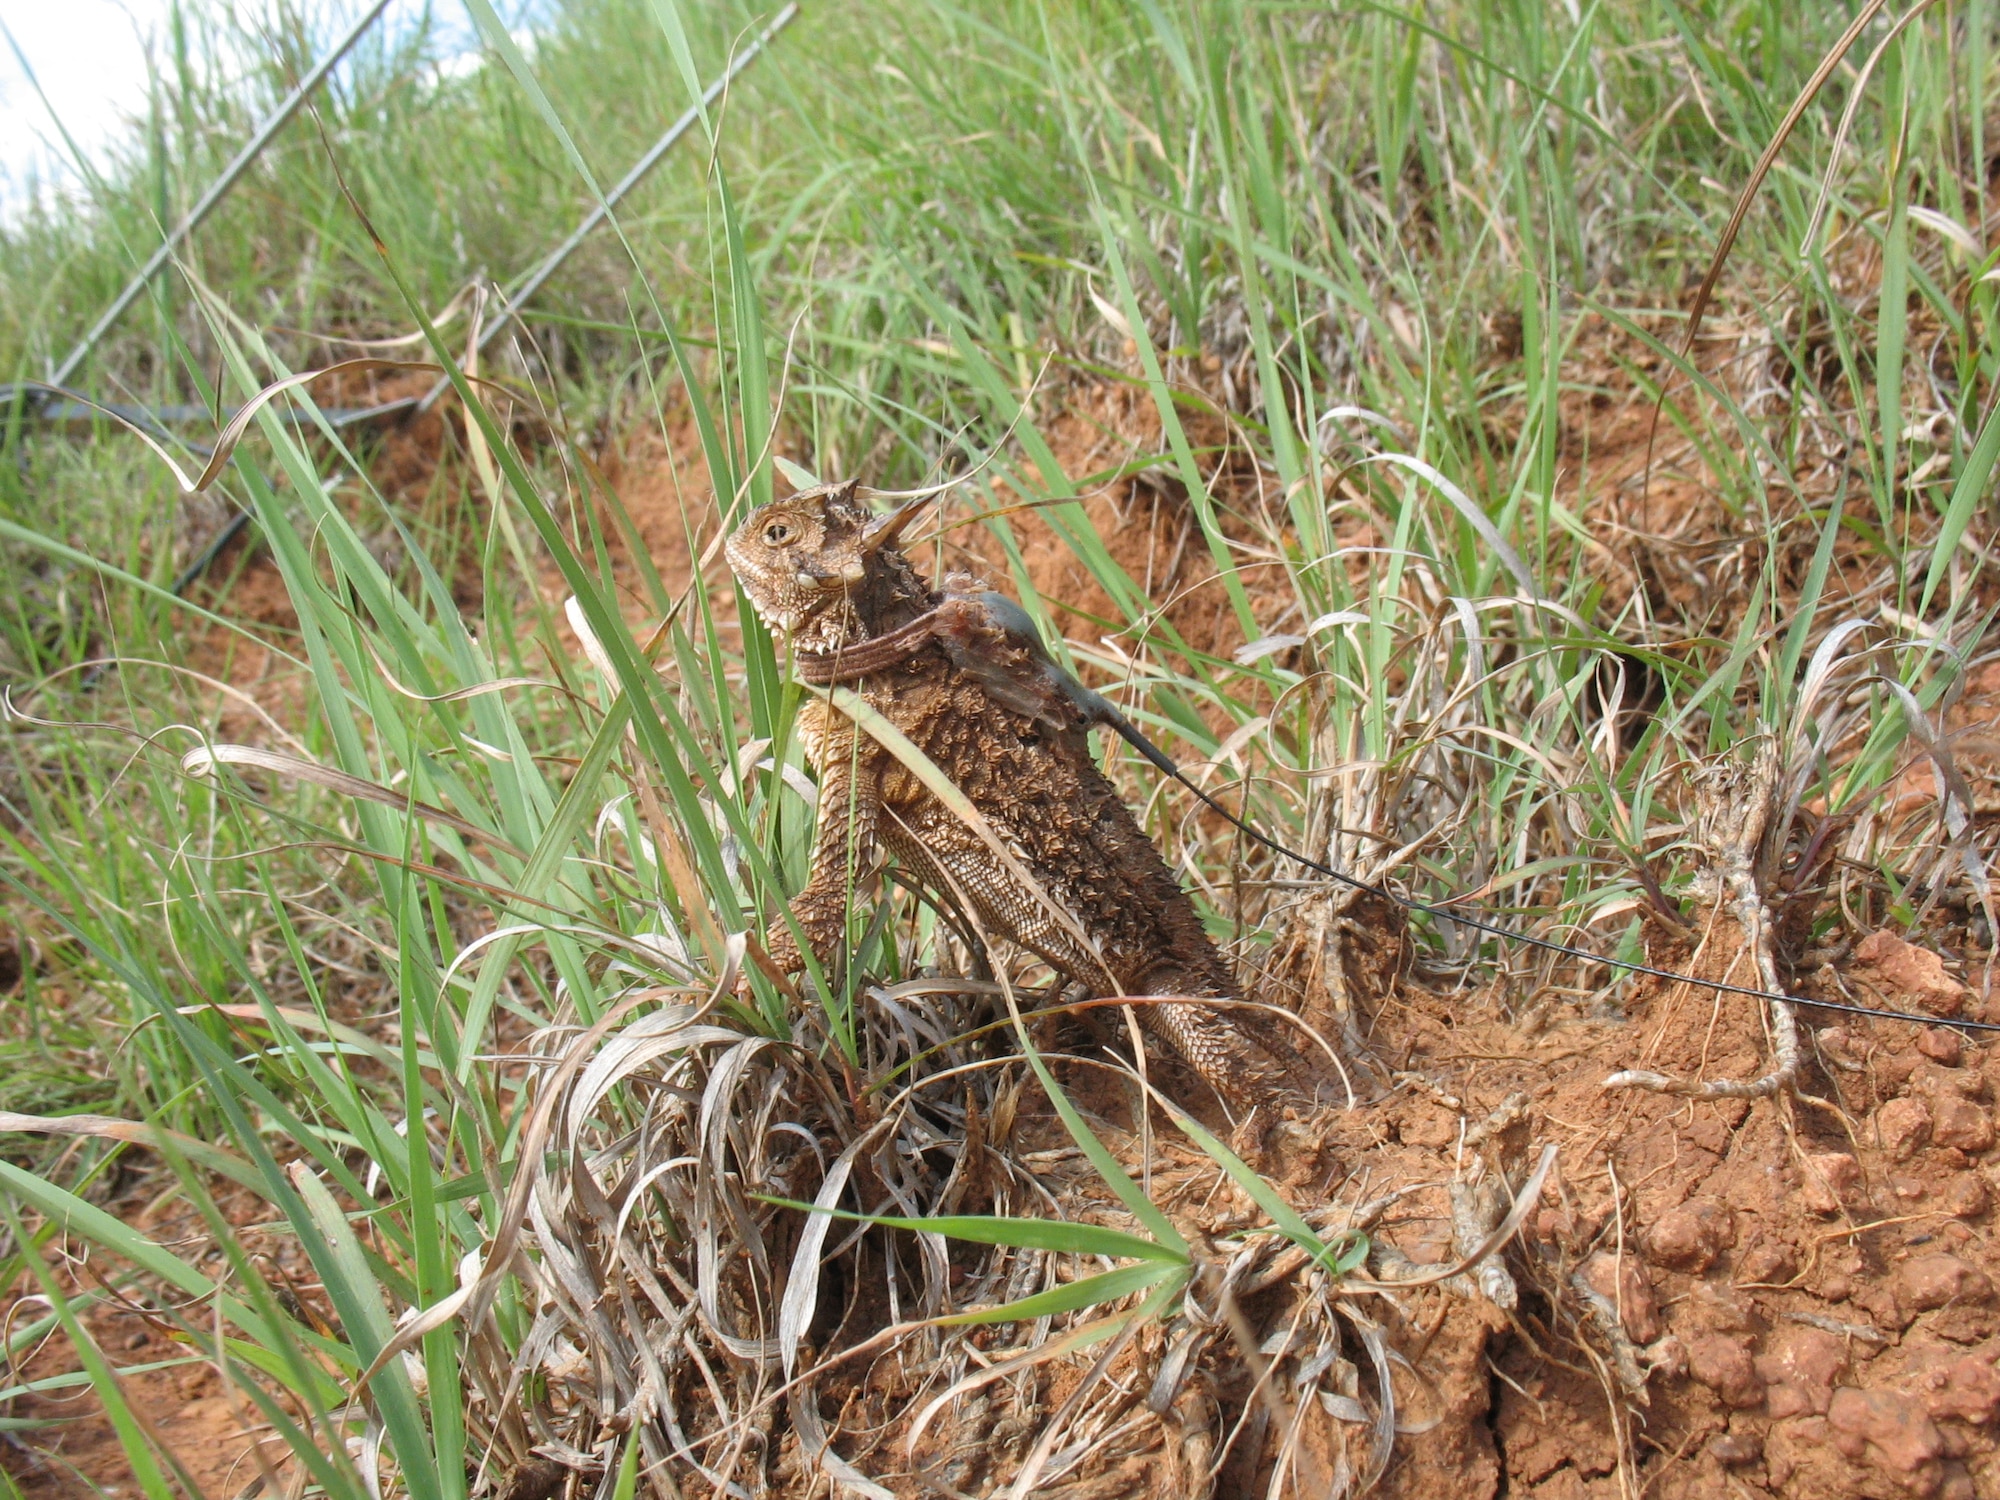 More than 350 species of animals, including this Texas horned lizard, call Tinker Air Force Base home. Find out about the different species on pages 8-9. Also, see page 10 for an article on a local author who has made the horned lizard the star of her newest book. (Courtesy photo)